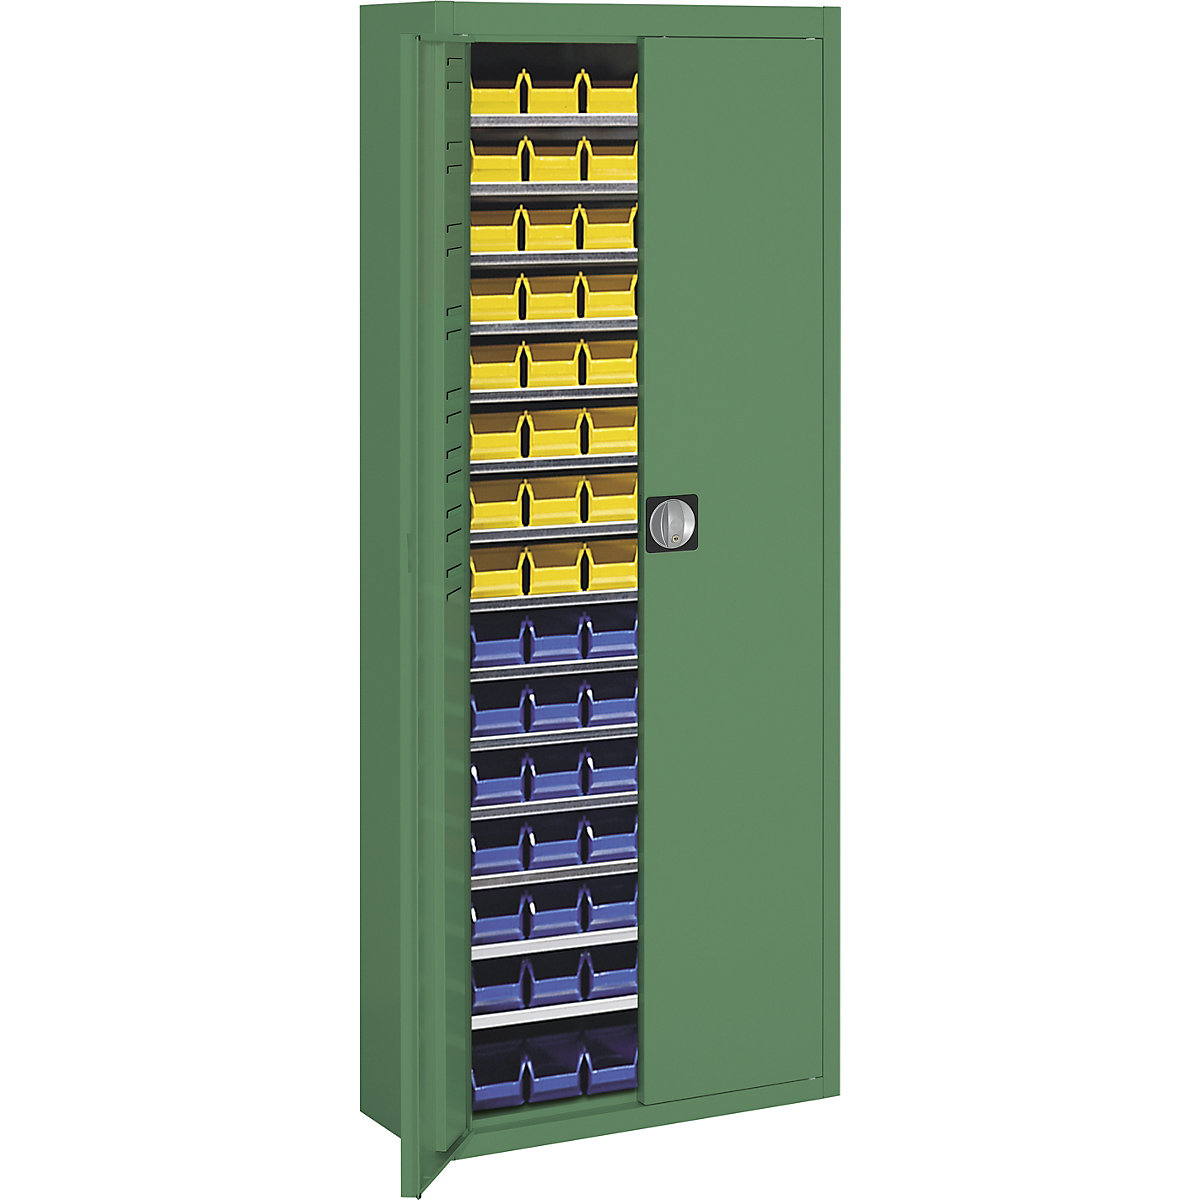 Storage cupboard with open fronted storage bins – mauser, HxWxD 1740 x 680 x 280 mm, single colour, green, 90 bins-14